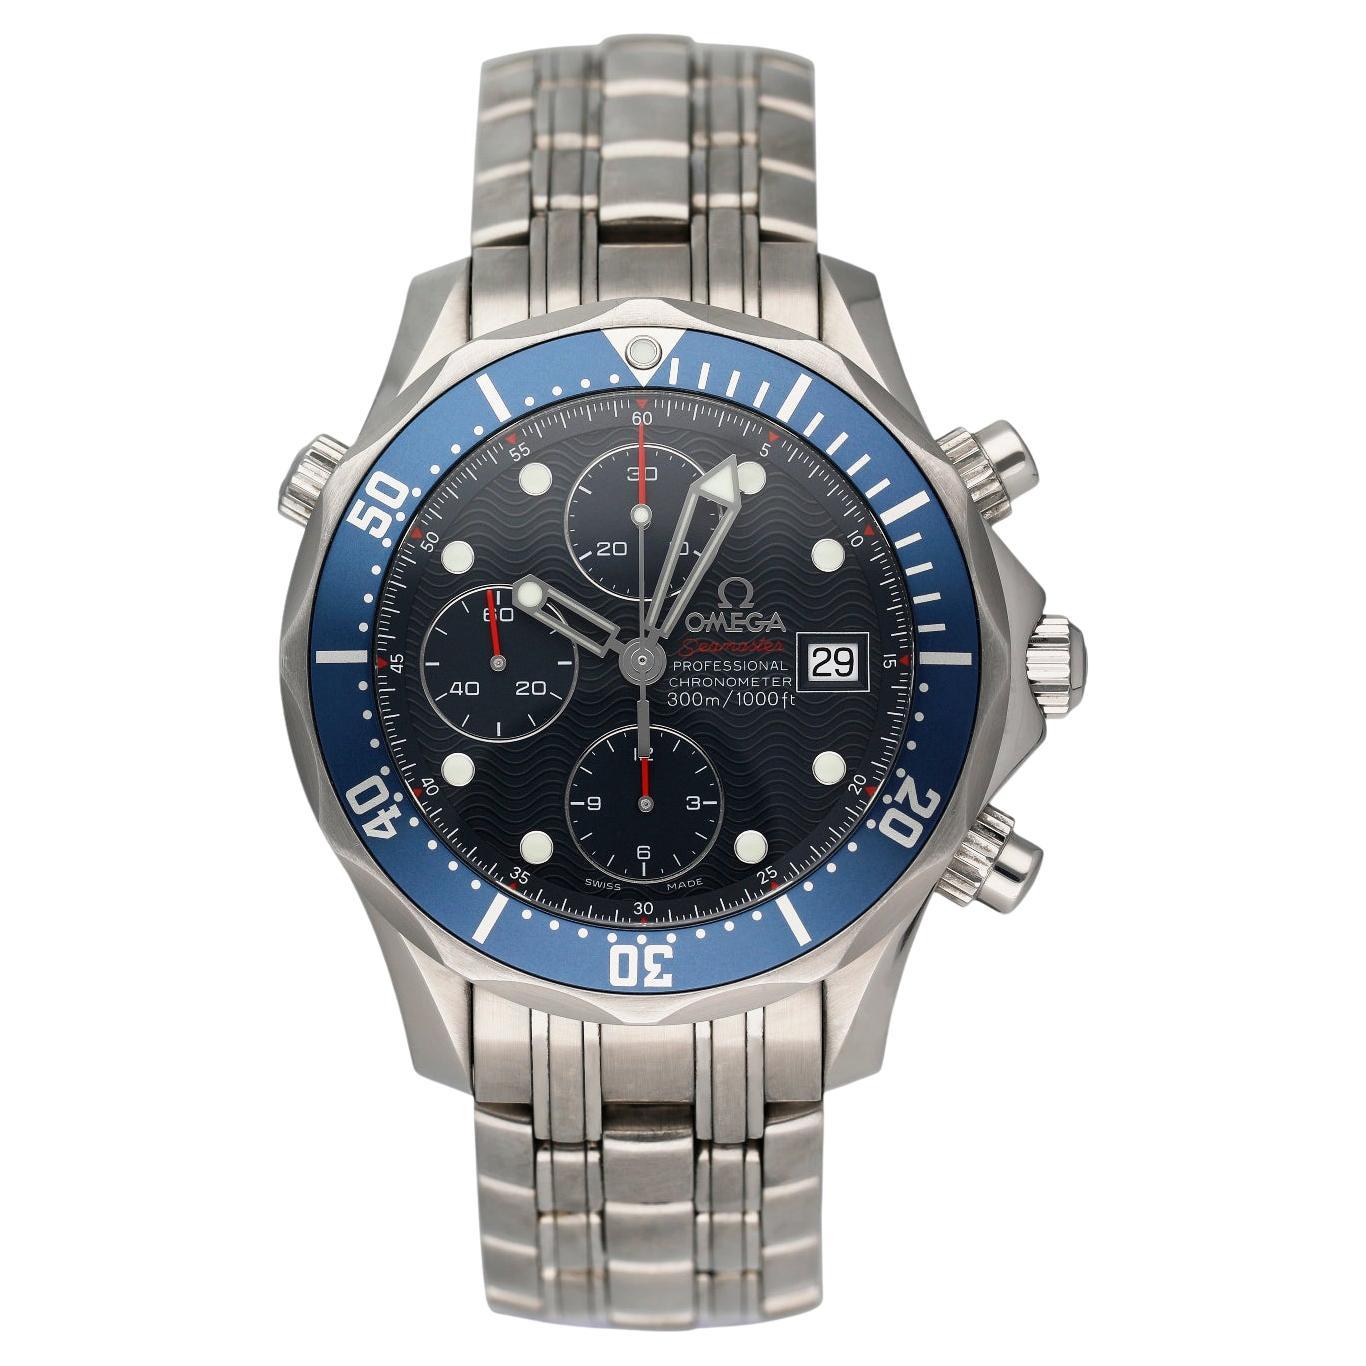 Omega Seamaster Chronograph Stainless Steel Mens Watch